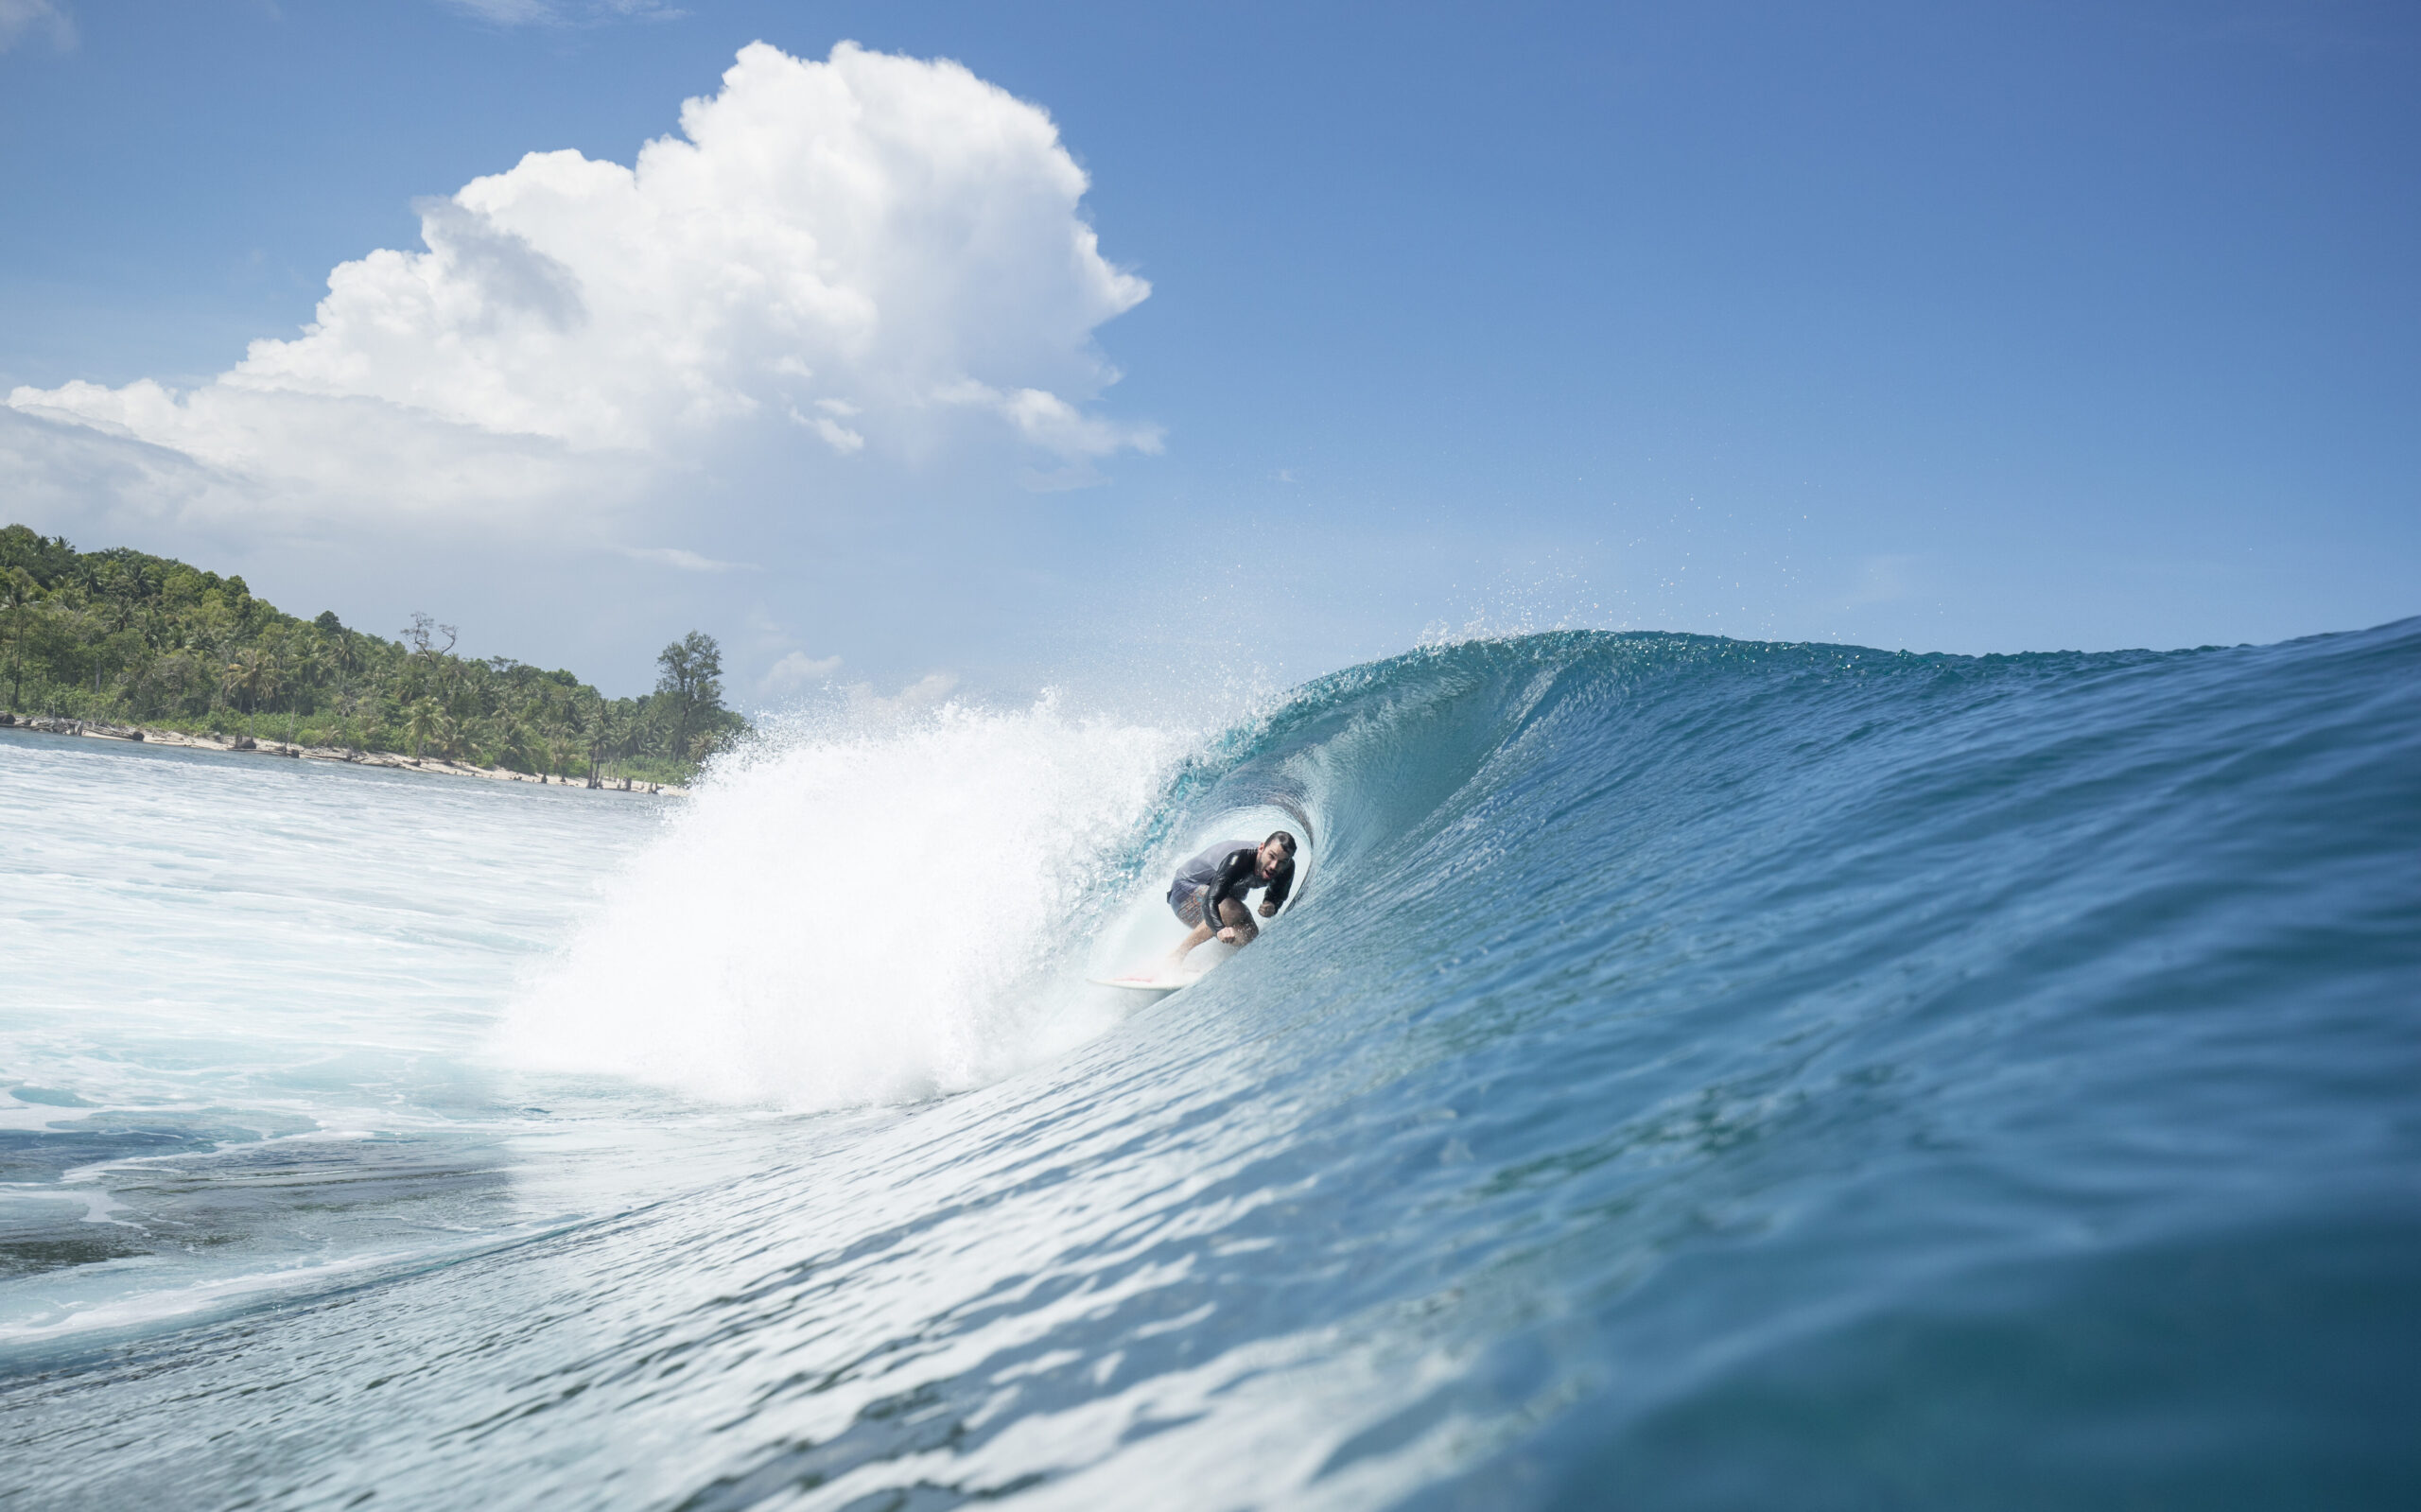 Surfer catching a perfect barrel at Lance's Left in the Mentawai Islands